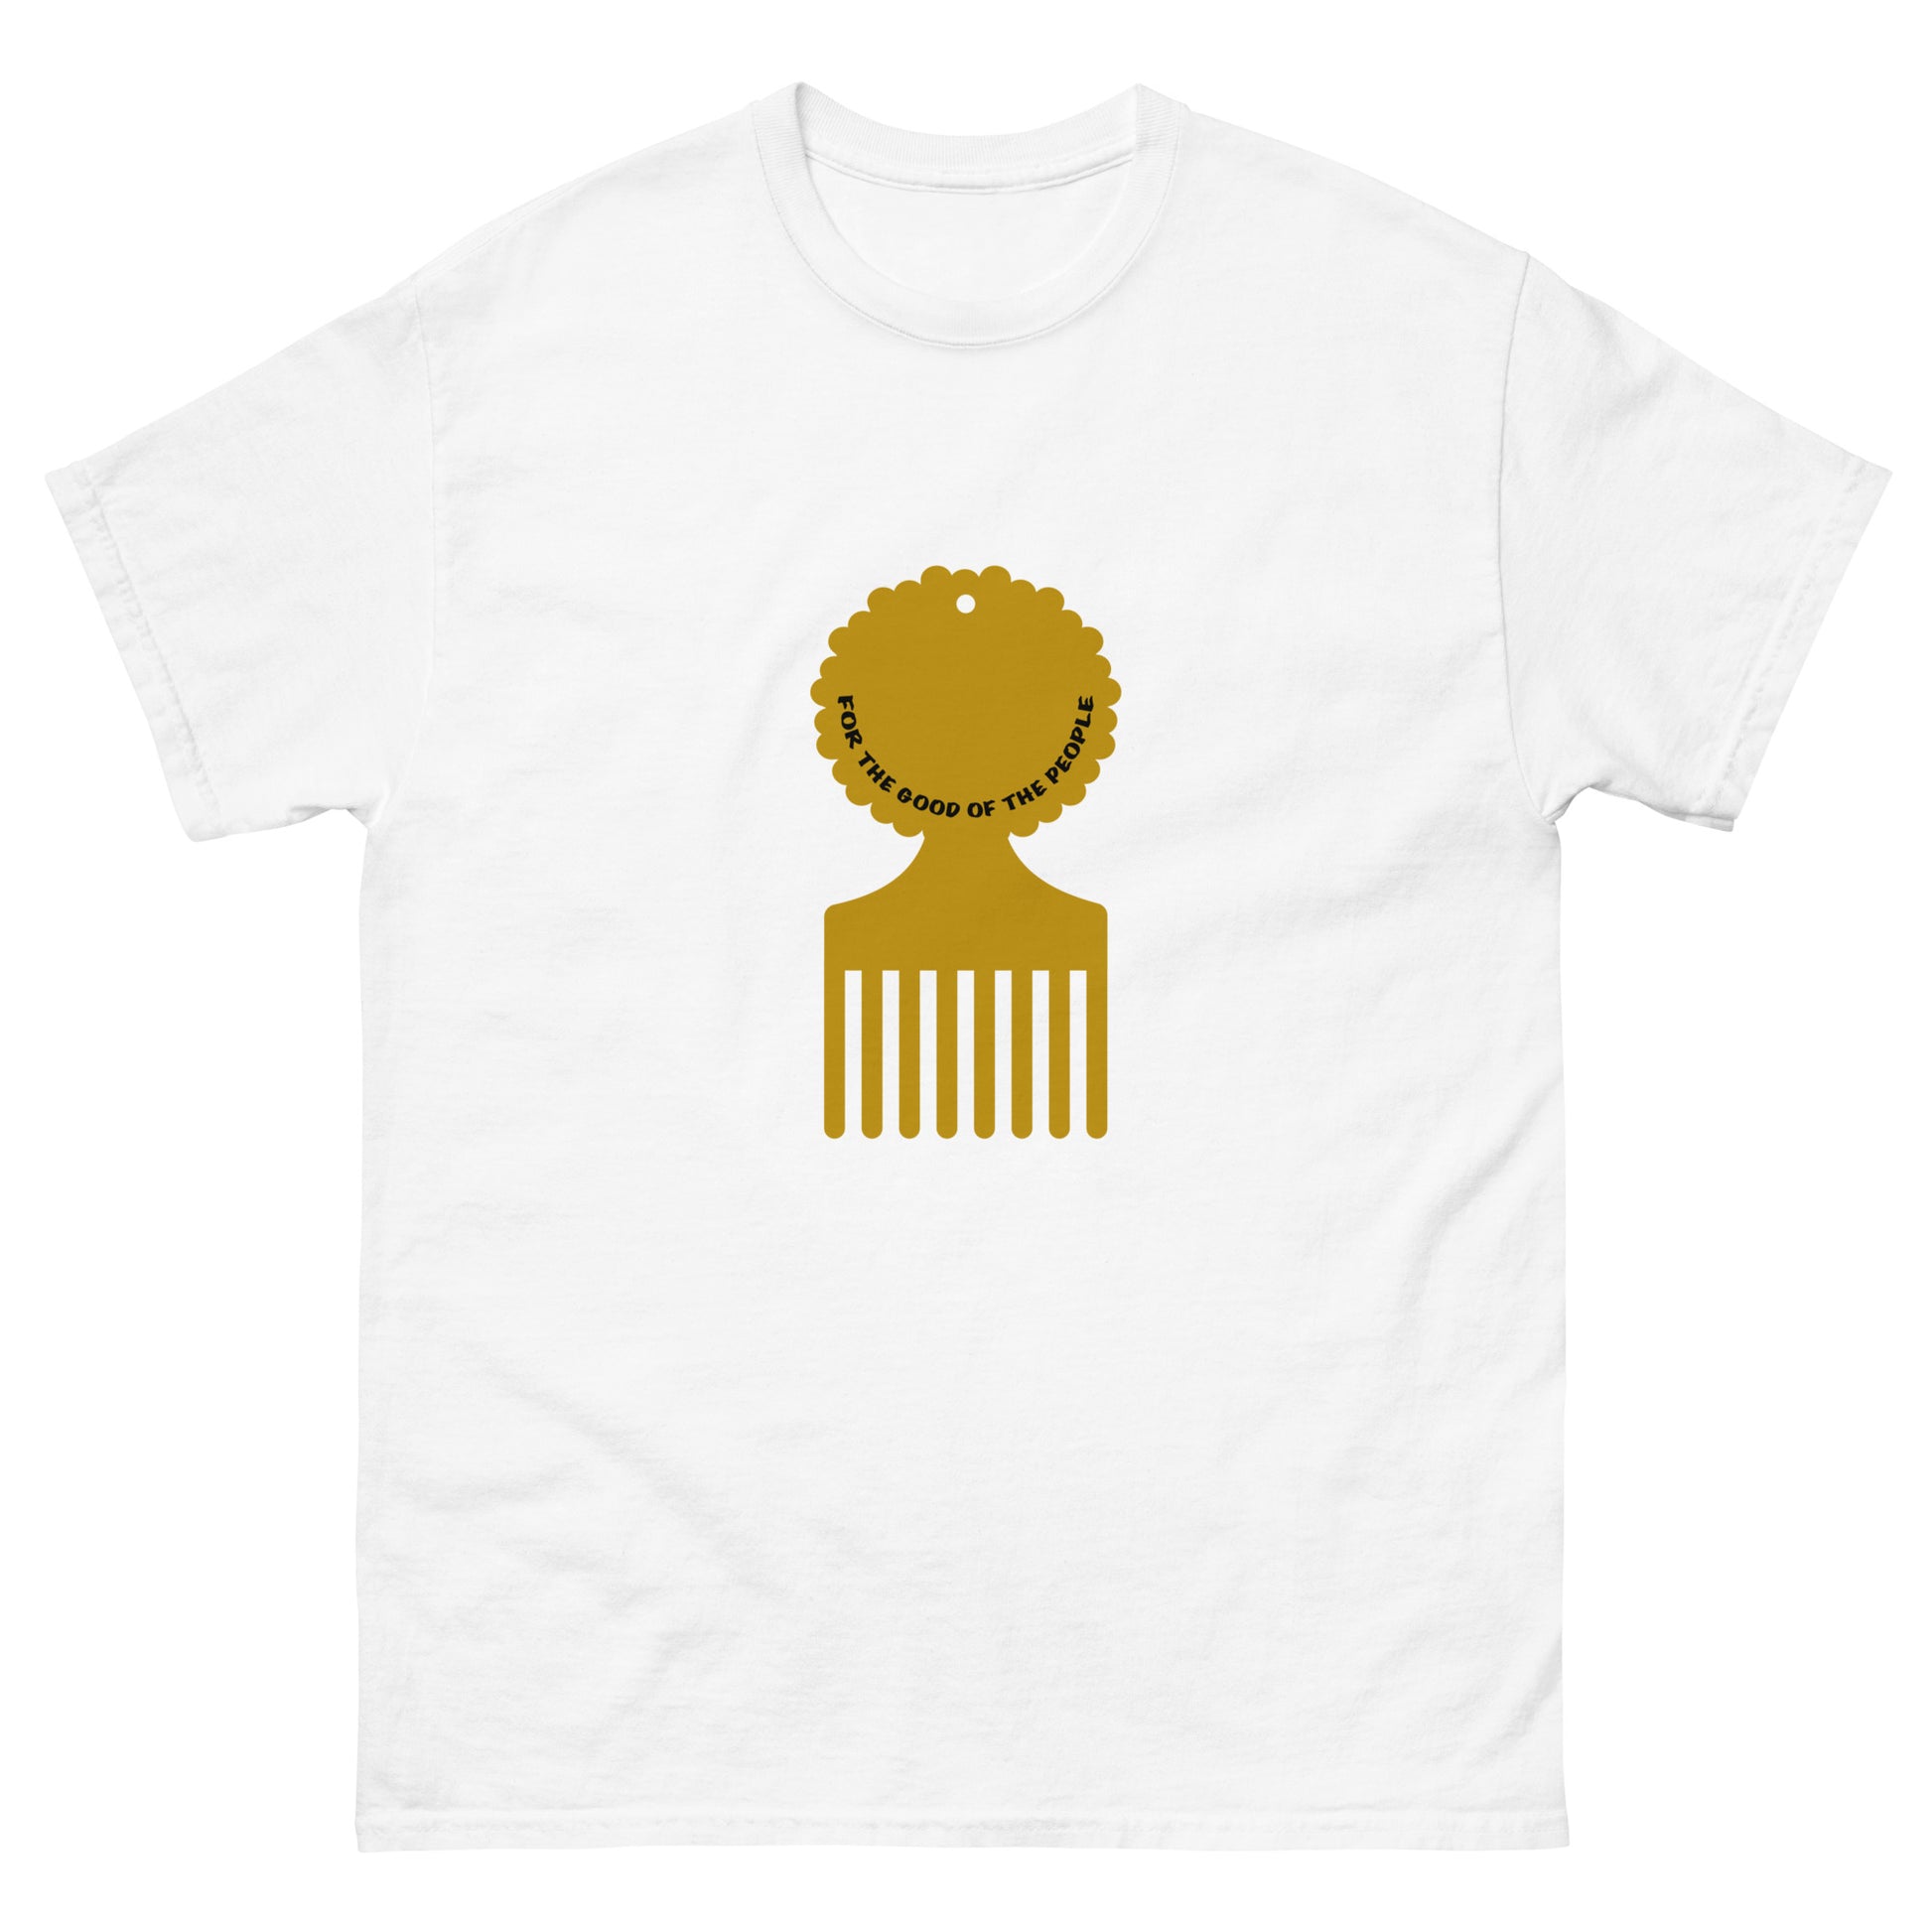 Men's white tee with gold afro pick in the center of shirt, with for the good of the people in black inside the afro pick's handle.